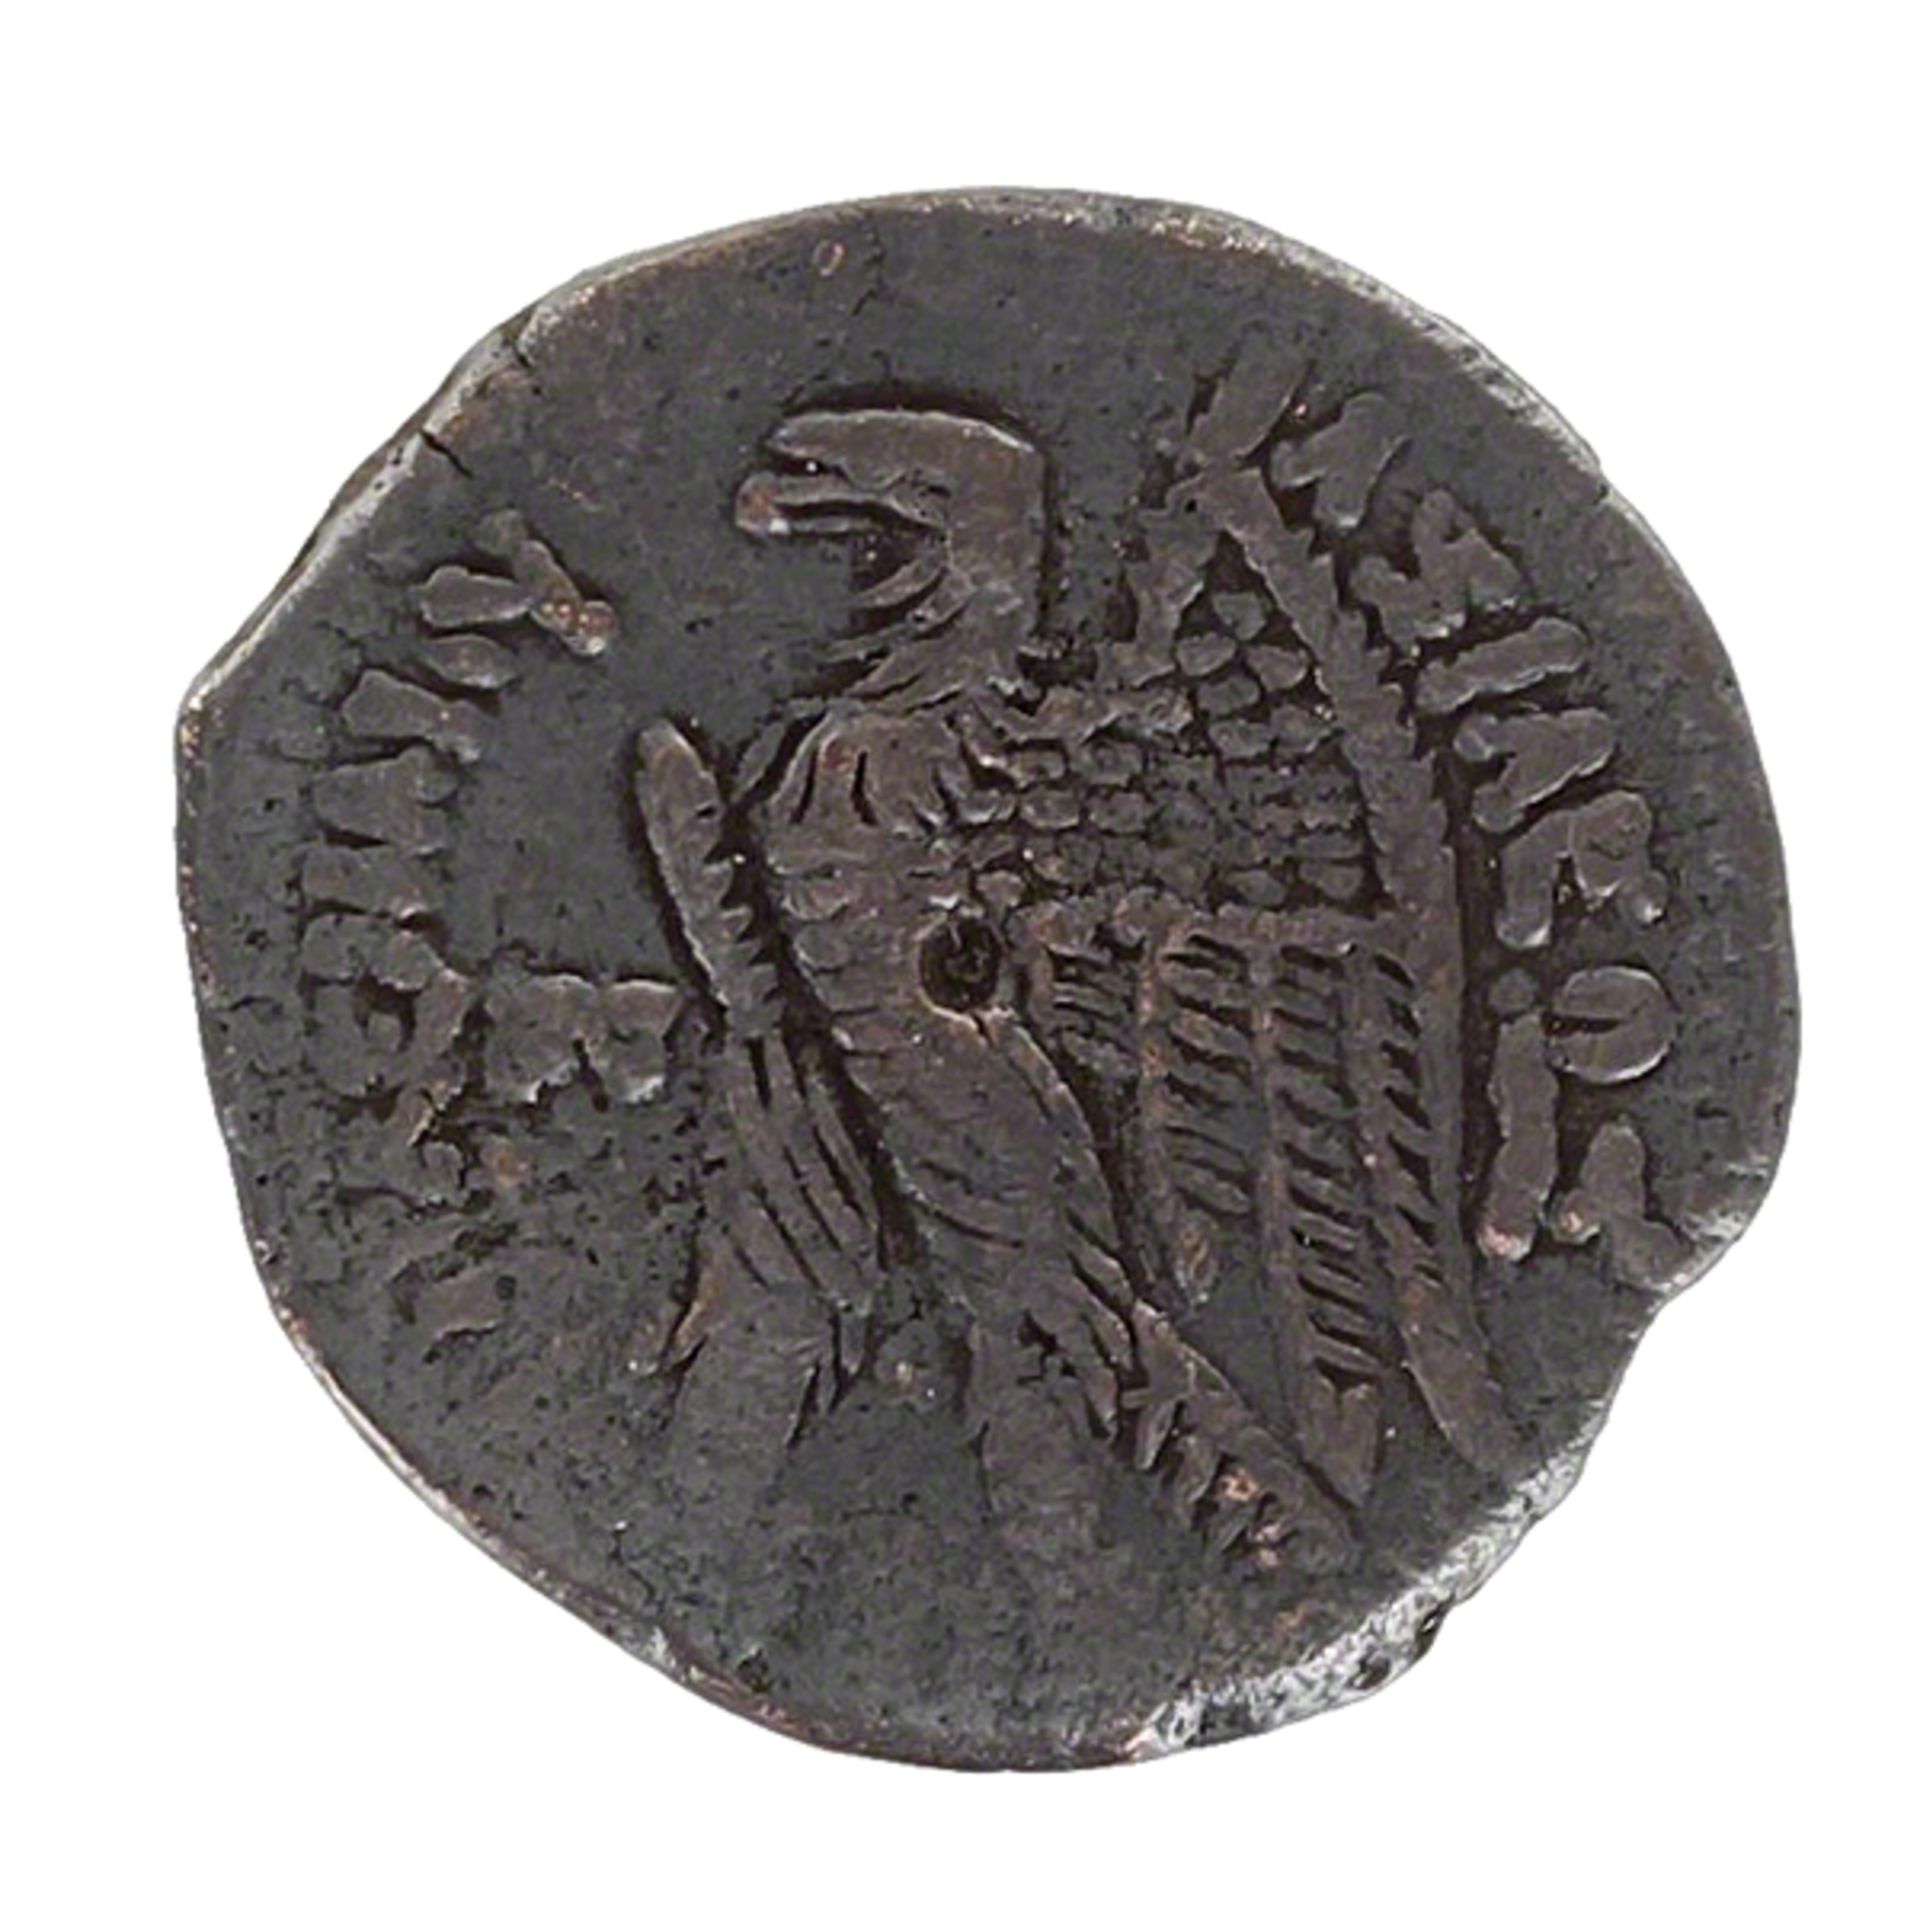 Cleopatra I, Isis AE, 204 BC Coin - Image 2 of 2